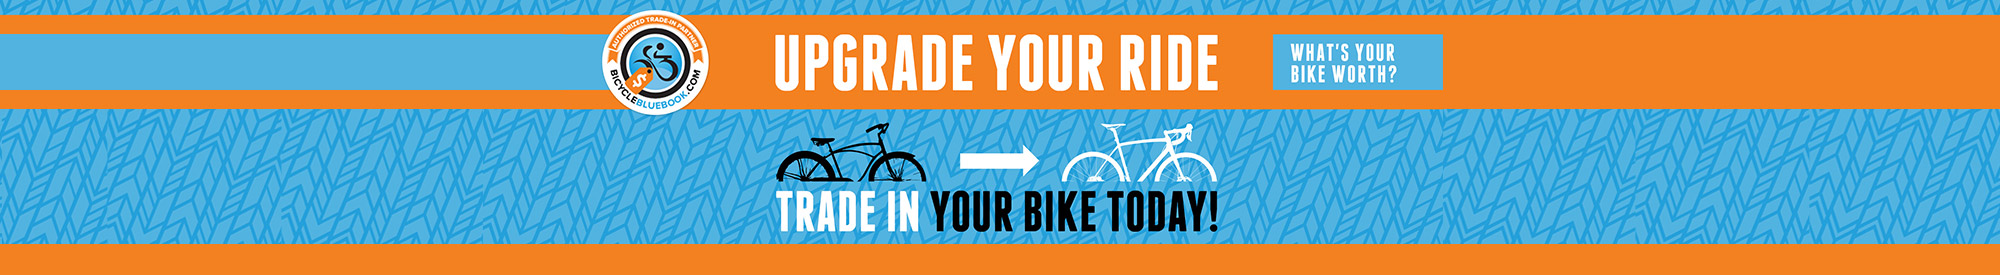 Bicycle Blue Book - Upgrade Your Ride, Trade In Your Bike Today